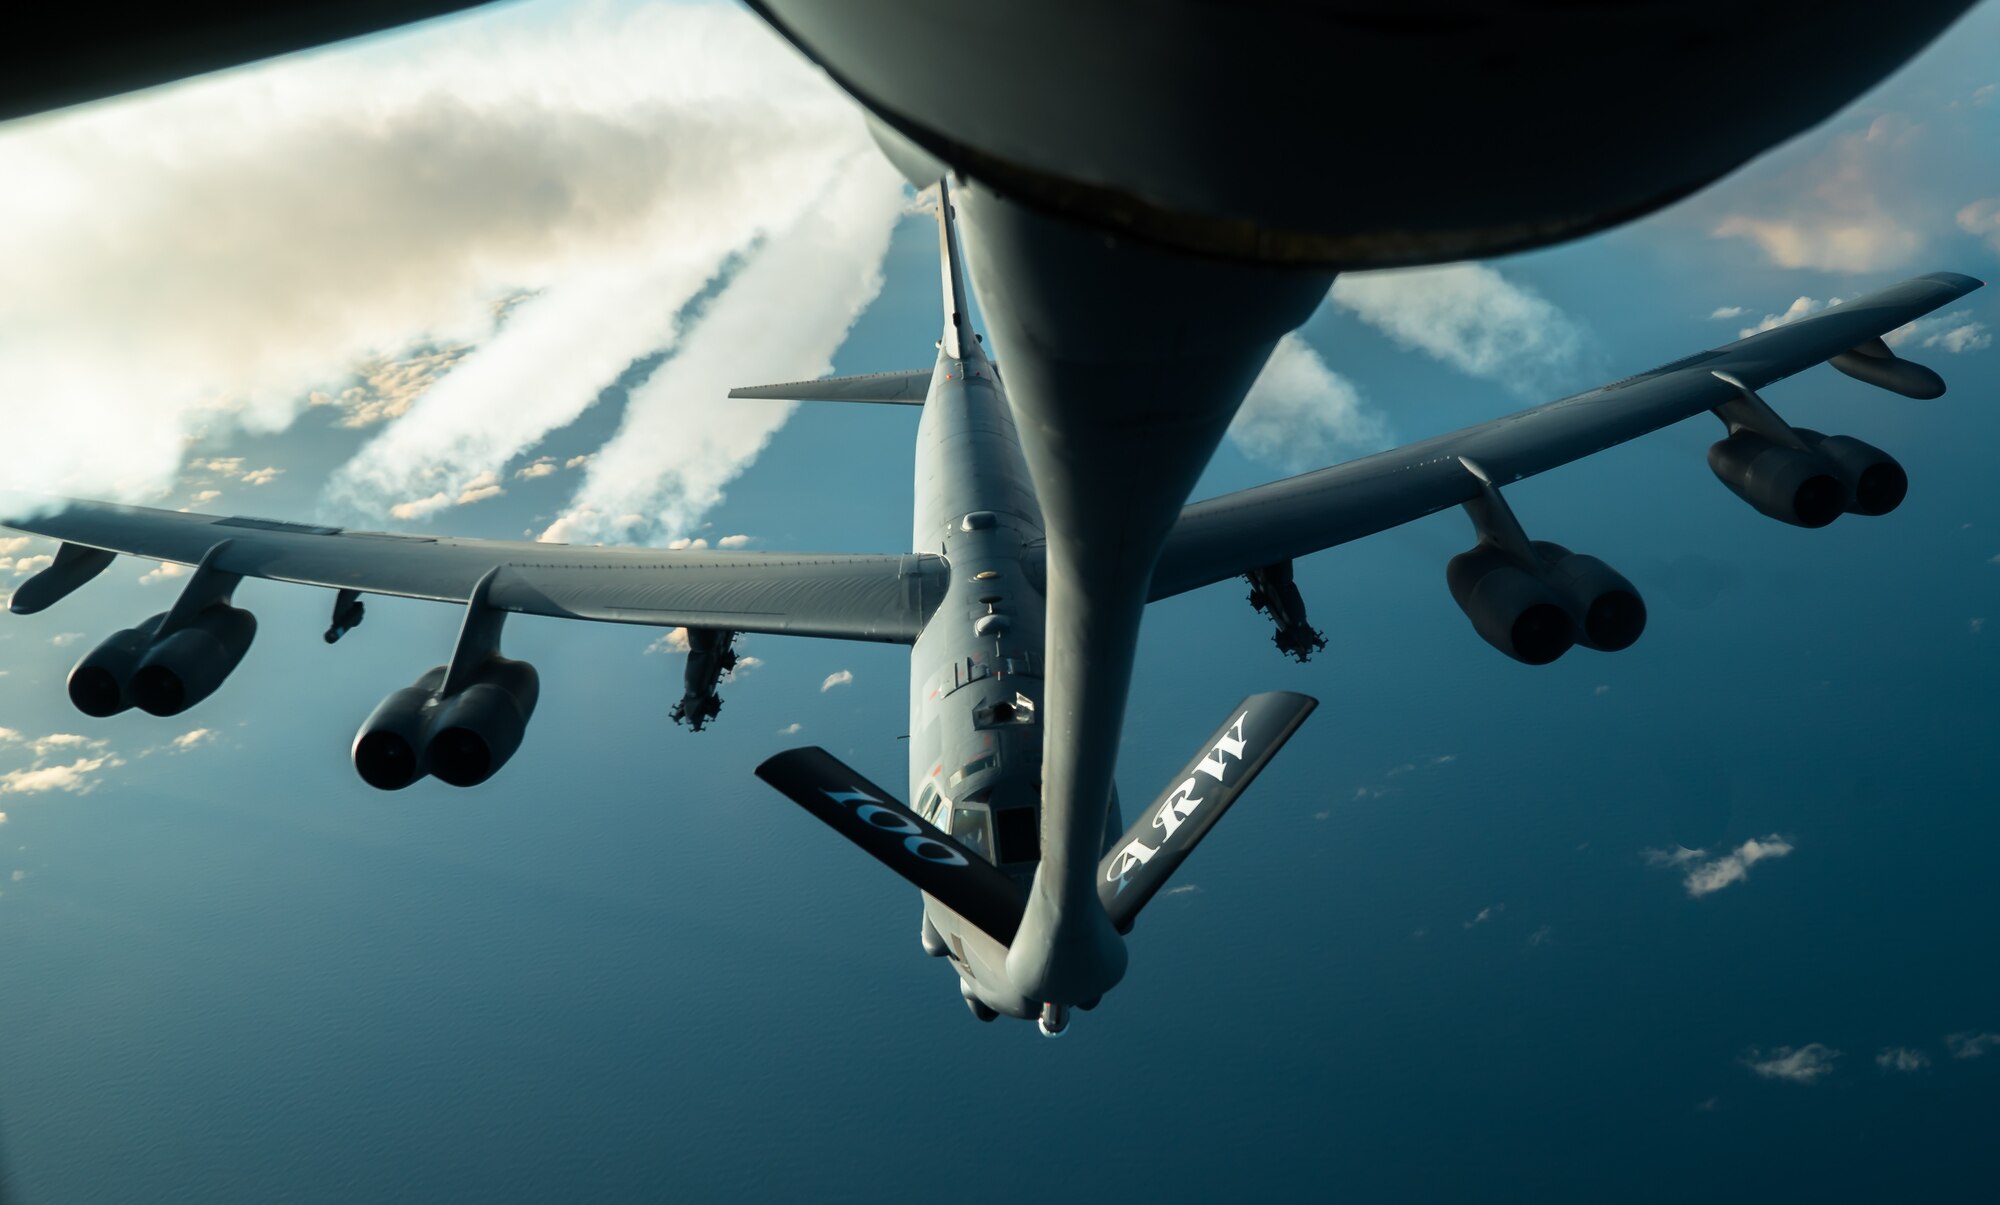 A U.S. Air Force B-52H Stratofortress, assigned to the 2nd Bomb Wing from Barksdale Air Force Base, Louisiana, prepares to receive fuel from a 100th Air Refueling Wing KC-135 Stratotanker over the Arctic during Bomber Task Force 20-1, Nov. 6, 2019. This deployment allows aircrews and support personnel to conduct theater integration and improve bomber interoperability with joint partners and allied nations. (U.S. Air Force photo by Staff Sgt. Trevor T. McBride)